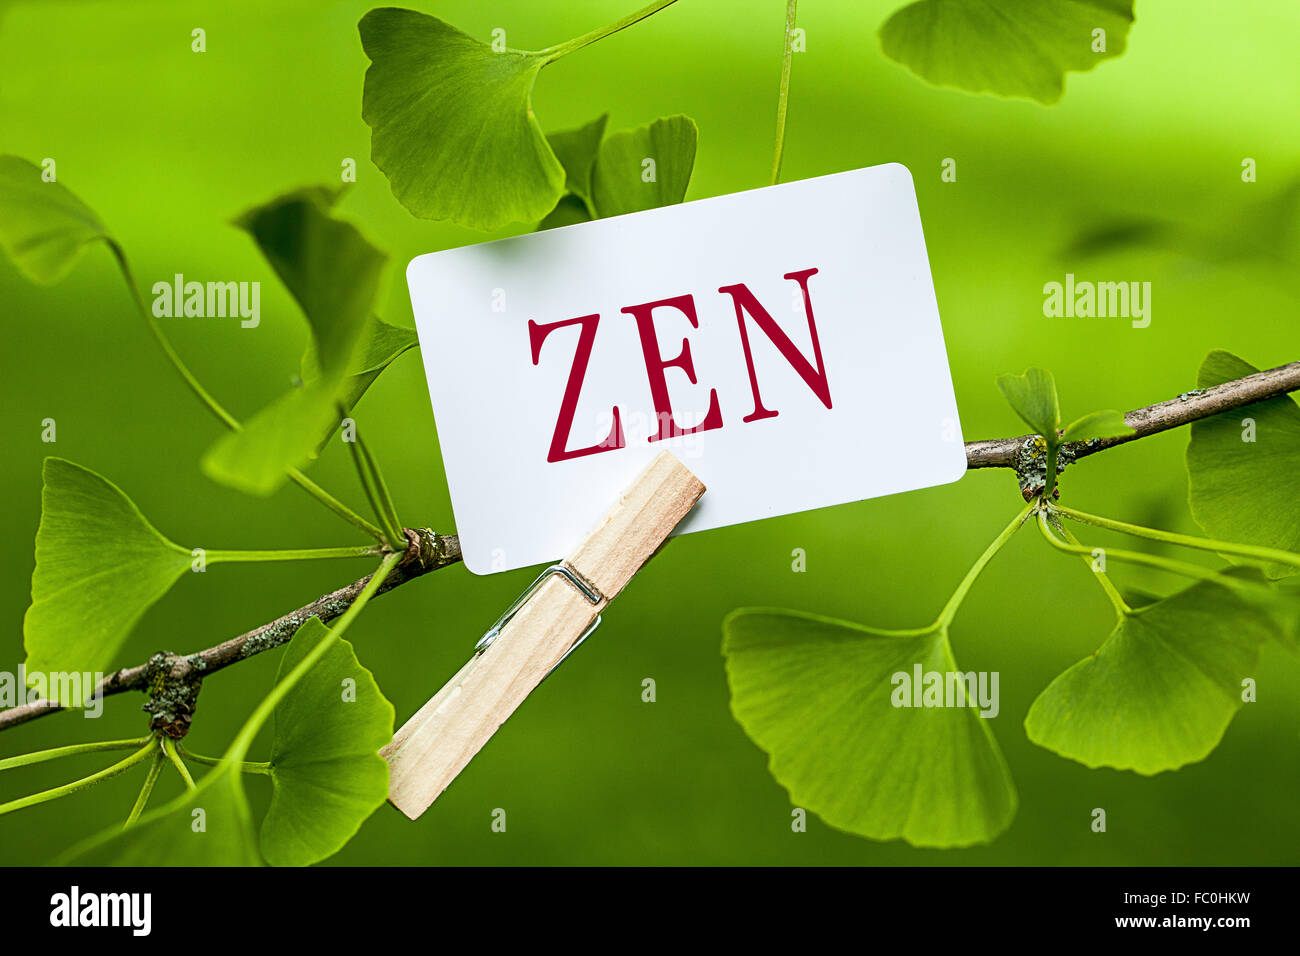 The Word “ZEN” in a Ginkgo Tree Stock Photo